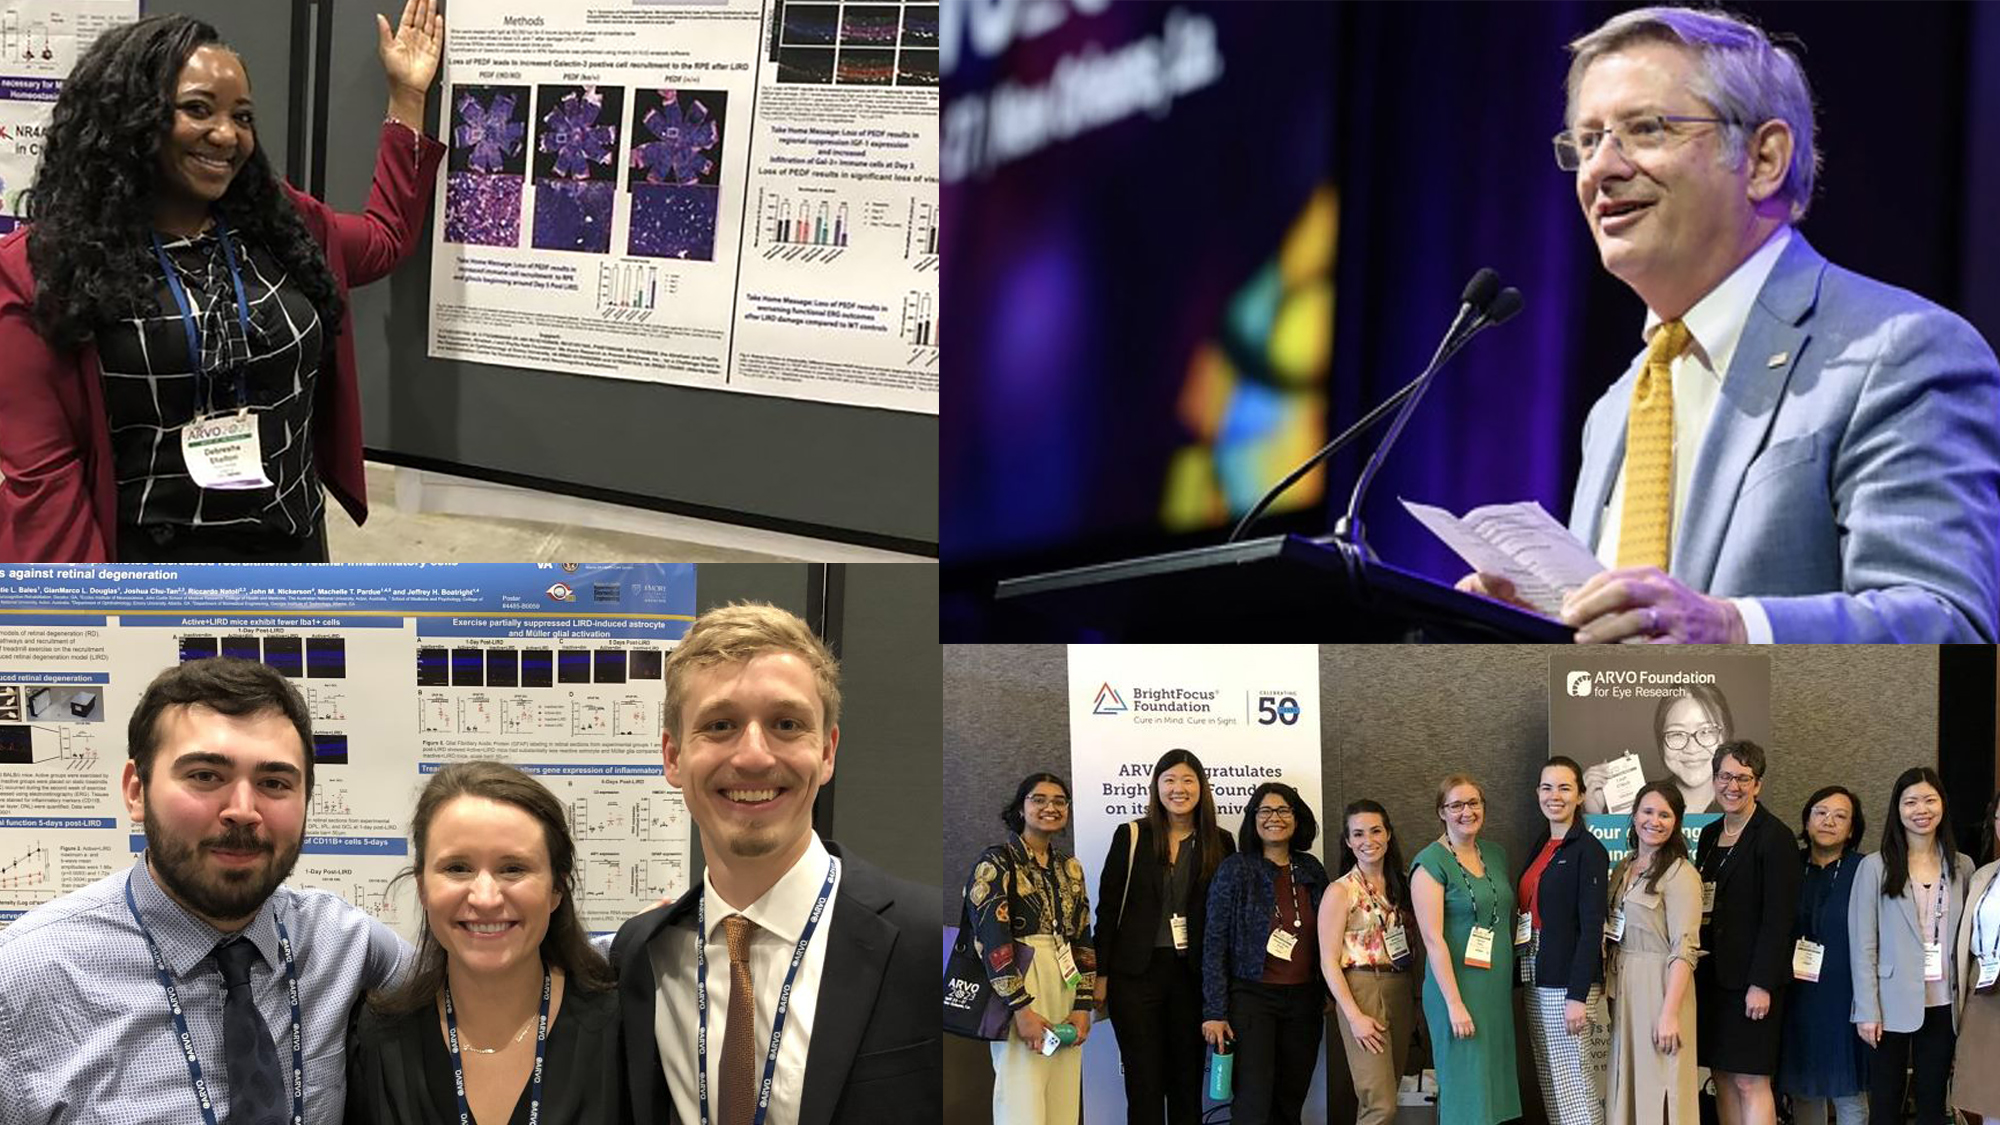 A Collage - Clockwise from left: Debresha Shelton presenting her research, Hans Grossniklaus addressing his colleagues, the  Women of Eye And Vision Research (WEAVR) at ARVO, and Haupt, Katie Bales, and StephenPhillips taking a break from their presentations at ARVO.